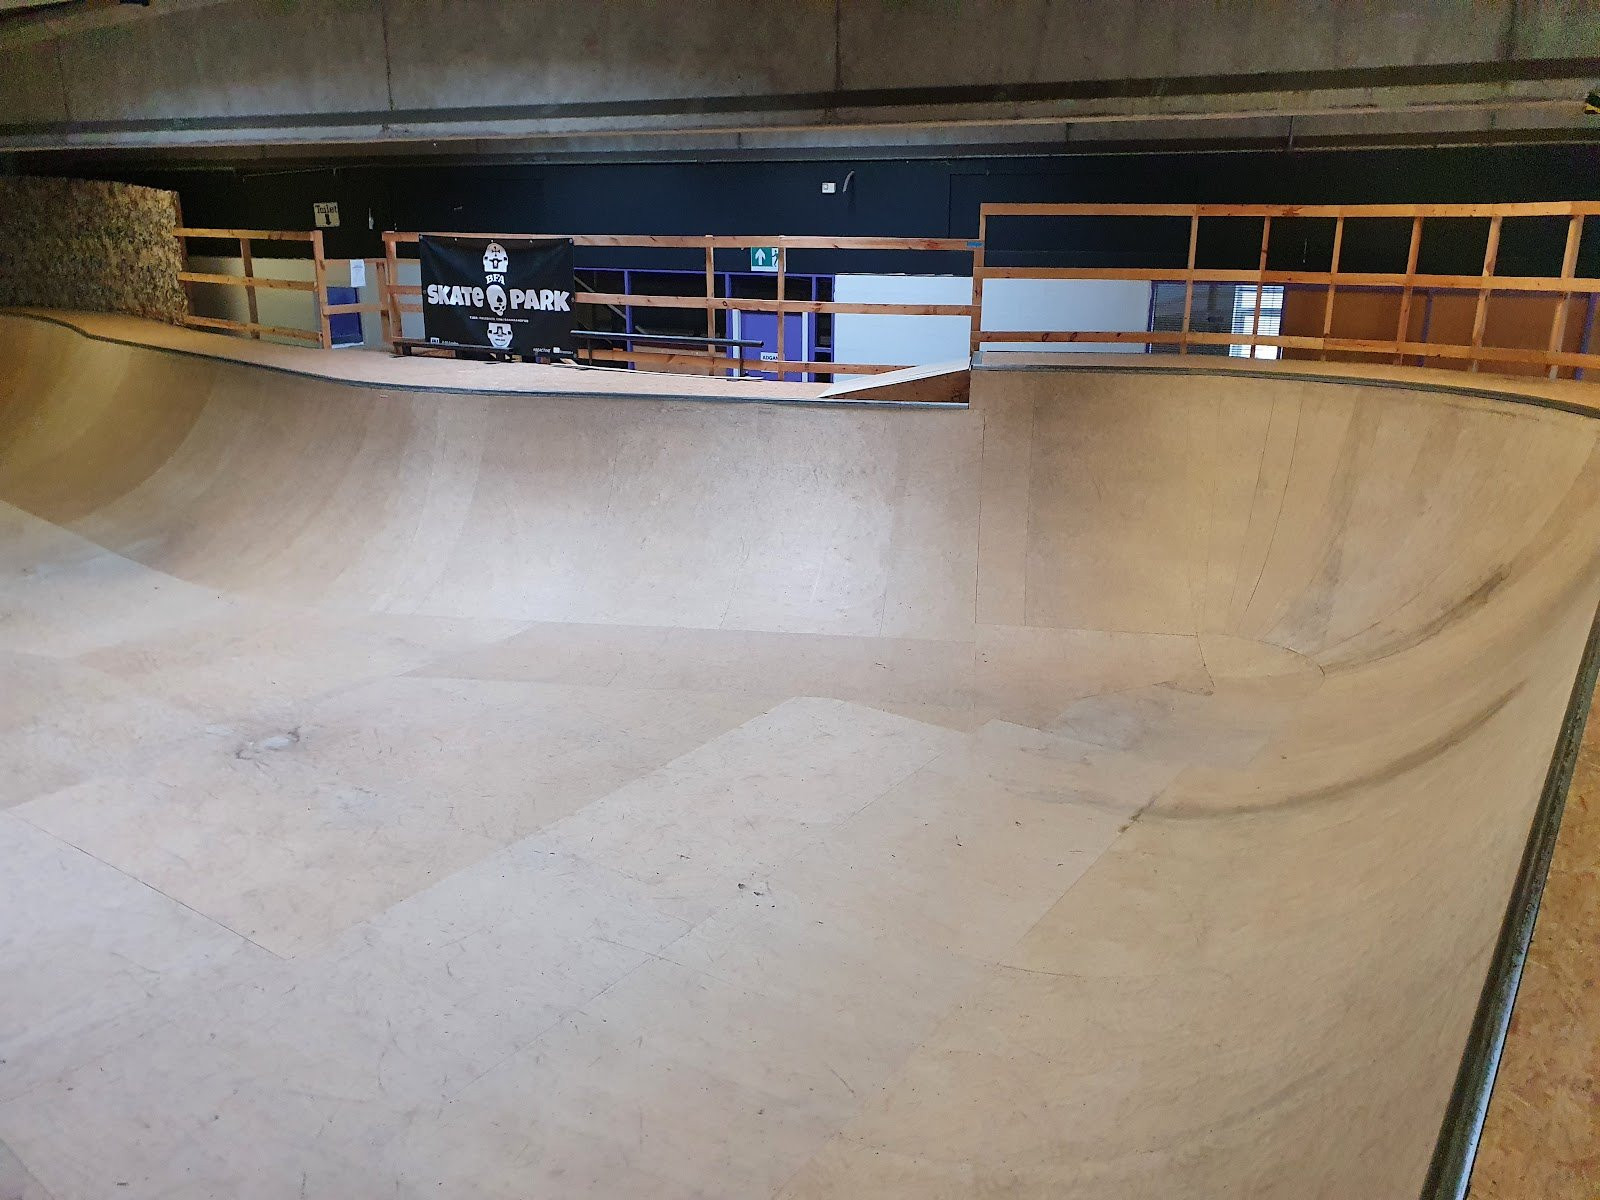 Allingåbro skatepark is built according to ancient principles which dictate banks and a quarter pipe at opposite ends with obstacles placed in the middle. In addition, there are plates so that you can wall-ride the end walls and the 3 mini ramps at the park are put together to form one large ramp. This means that it varies in heights and depths. This makes Allingåbro Skatepark unique and different from other indoor skateparks. The elements are made of wood and steel. The latest addition to the park is the new, fun mini vert, that is familiar to most skaters.Unfortunately, the park is very worn. The park is not heated, the copings are loose. The holes in the ramps and broken plates characterise this once great park. Therefore, you should not go out of your way to visit the park.You cannot count on the opening hours and the ones that we have found are not regular. If you know anything about the opening hours of Allingåbro skatepark, we would love to hear from you. You can contact us by sending an email to: info@skateparks.dk.Allingåbro’s admission fee is 25 DKK. It is also possible to buy a monthly membership for 125 DKK.